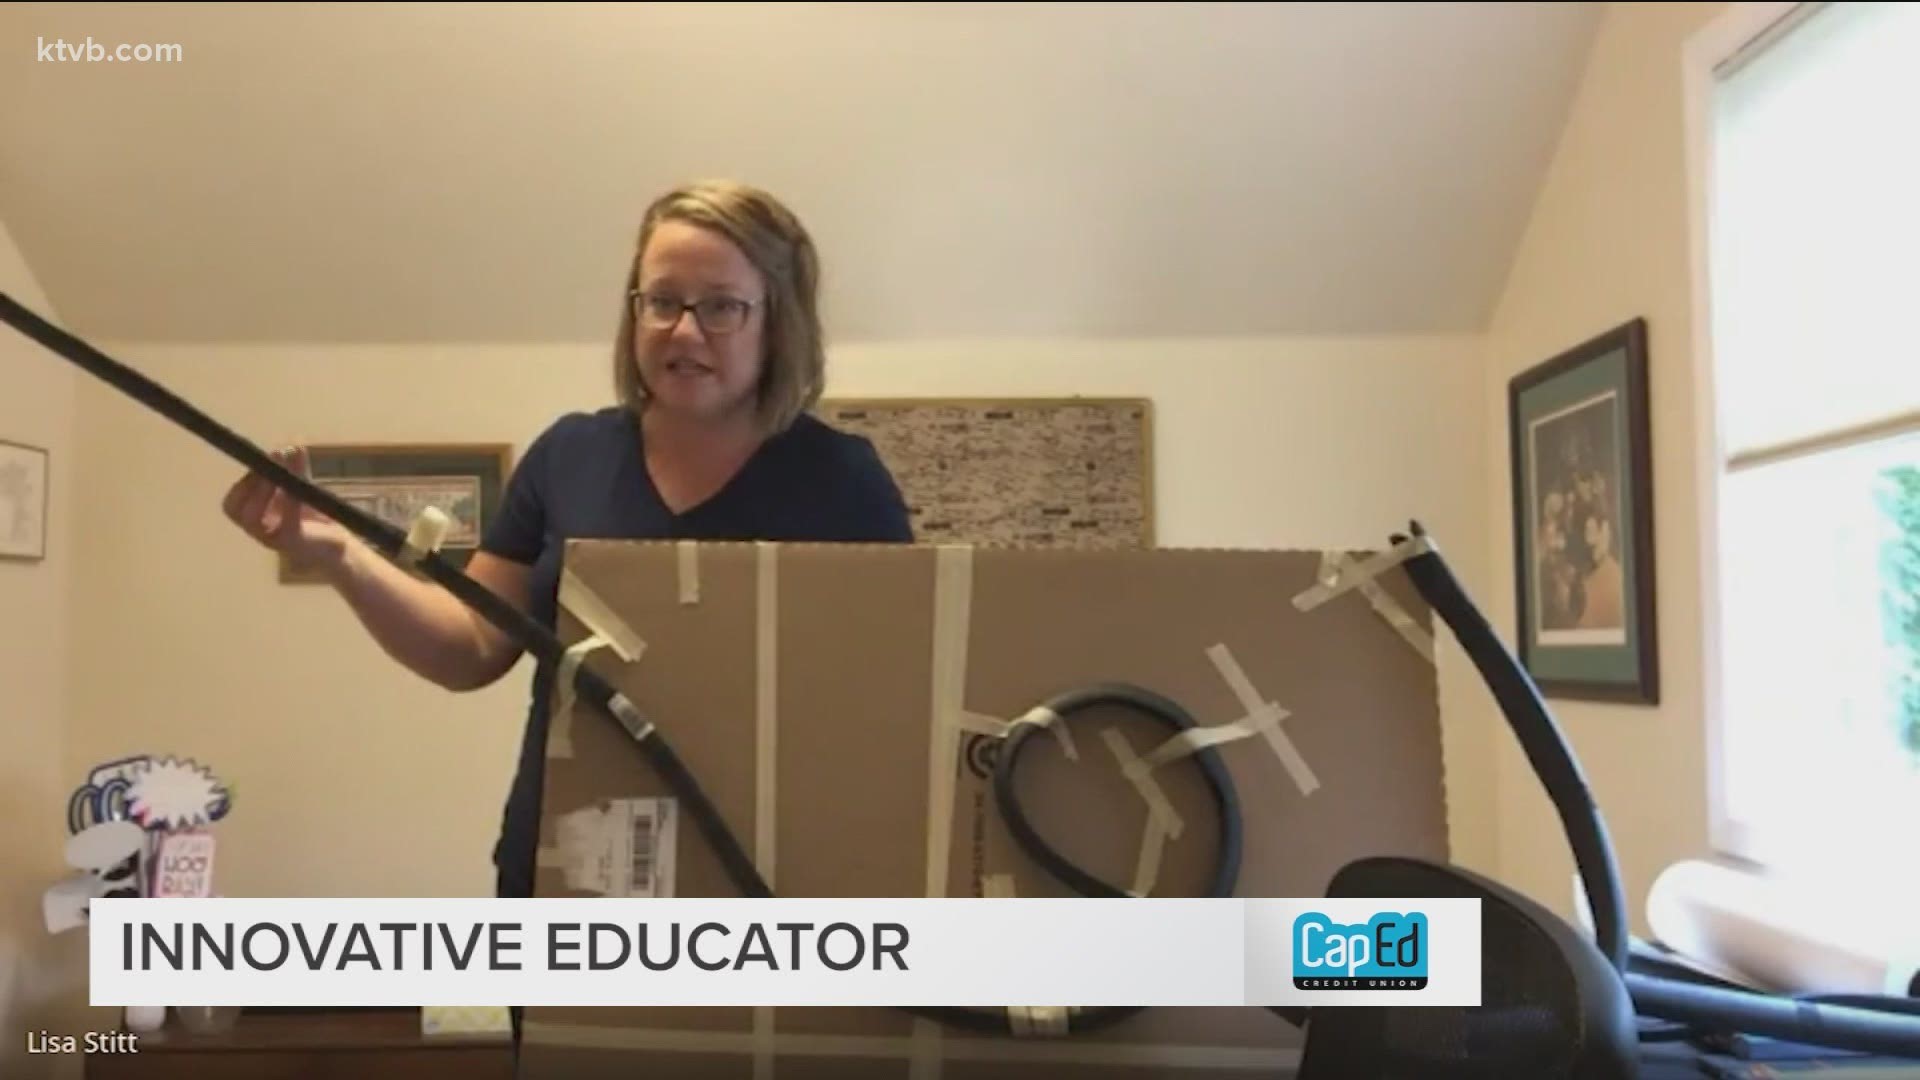 Lisa Stitt taught in the classroom for two decades, but this year made the switch to teaching in the brand new Boise Online School in the Boise School District.